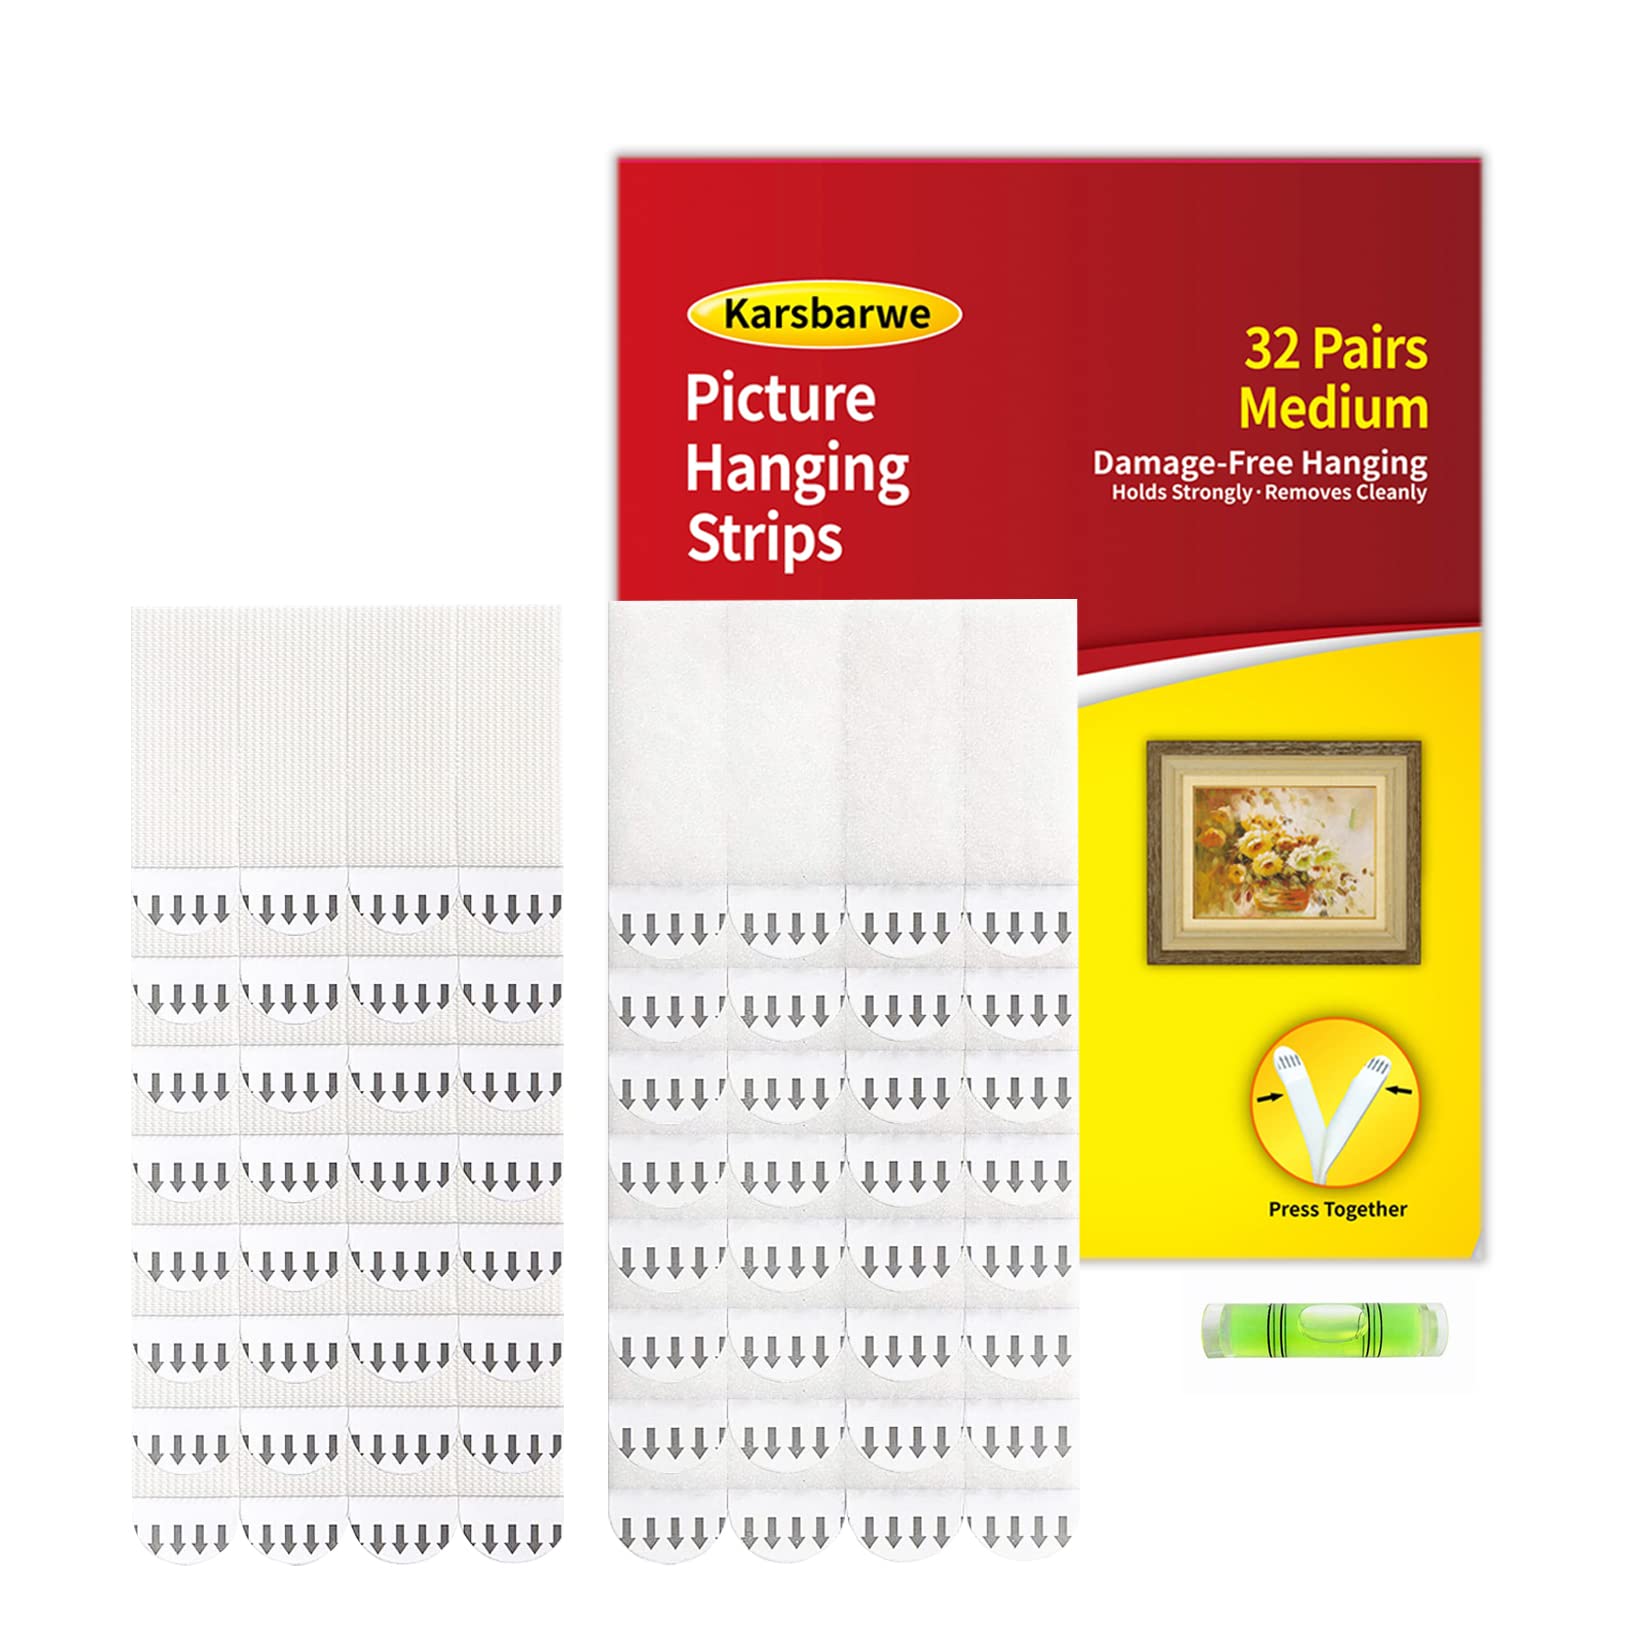 32-Pairs(64strips) Medium Picture Hanging Strips Heavy Duty